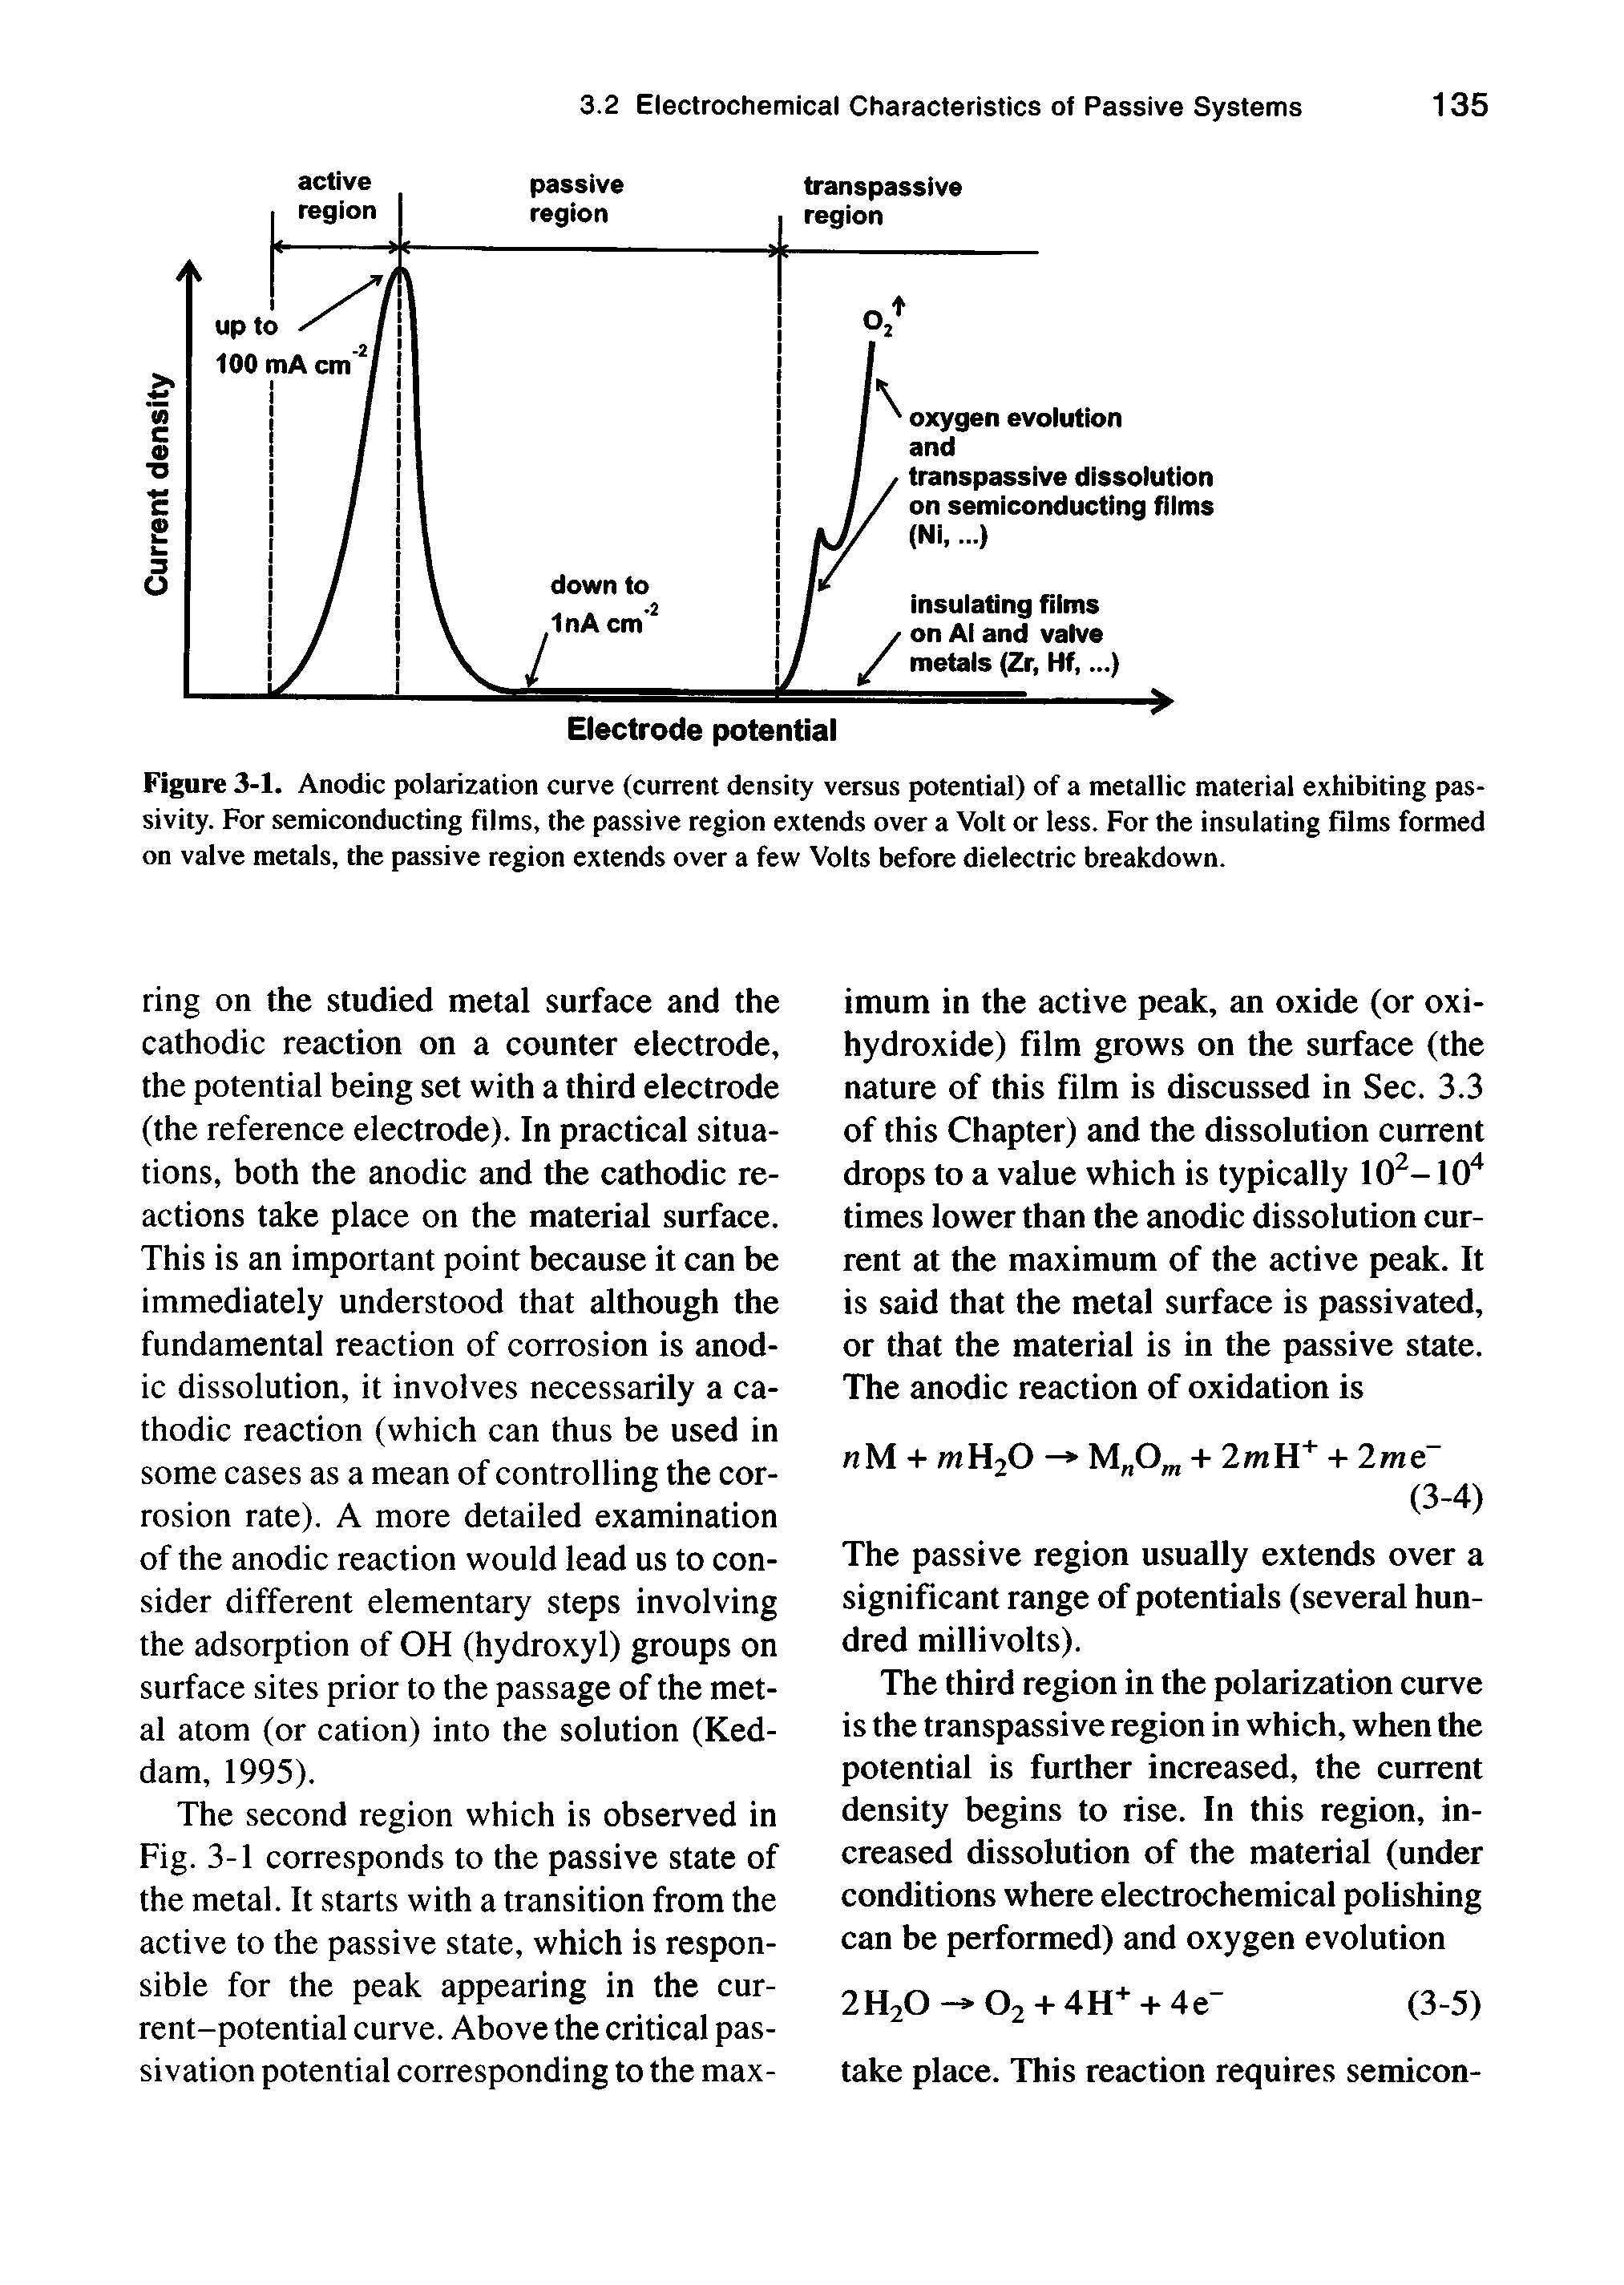 Figure 3-1. Anodic polarization curve (current density versus potential) of a metallic material exhibiting passivity. For semiconducting films, the passive region extends over a Volt or less. For the insulating films formed on valve metals, the passive region extends over a few Volts before dielectric breakdown.